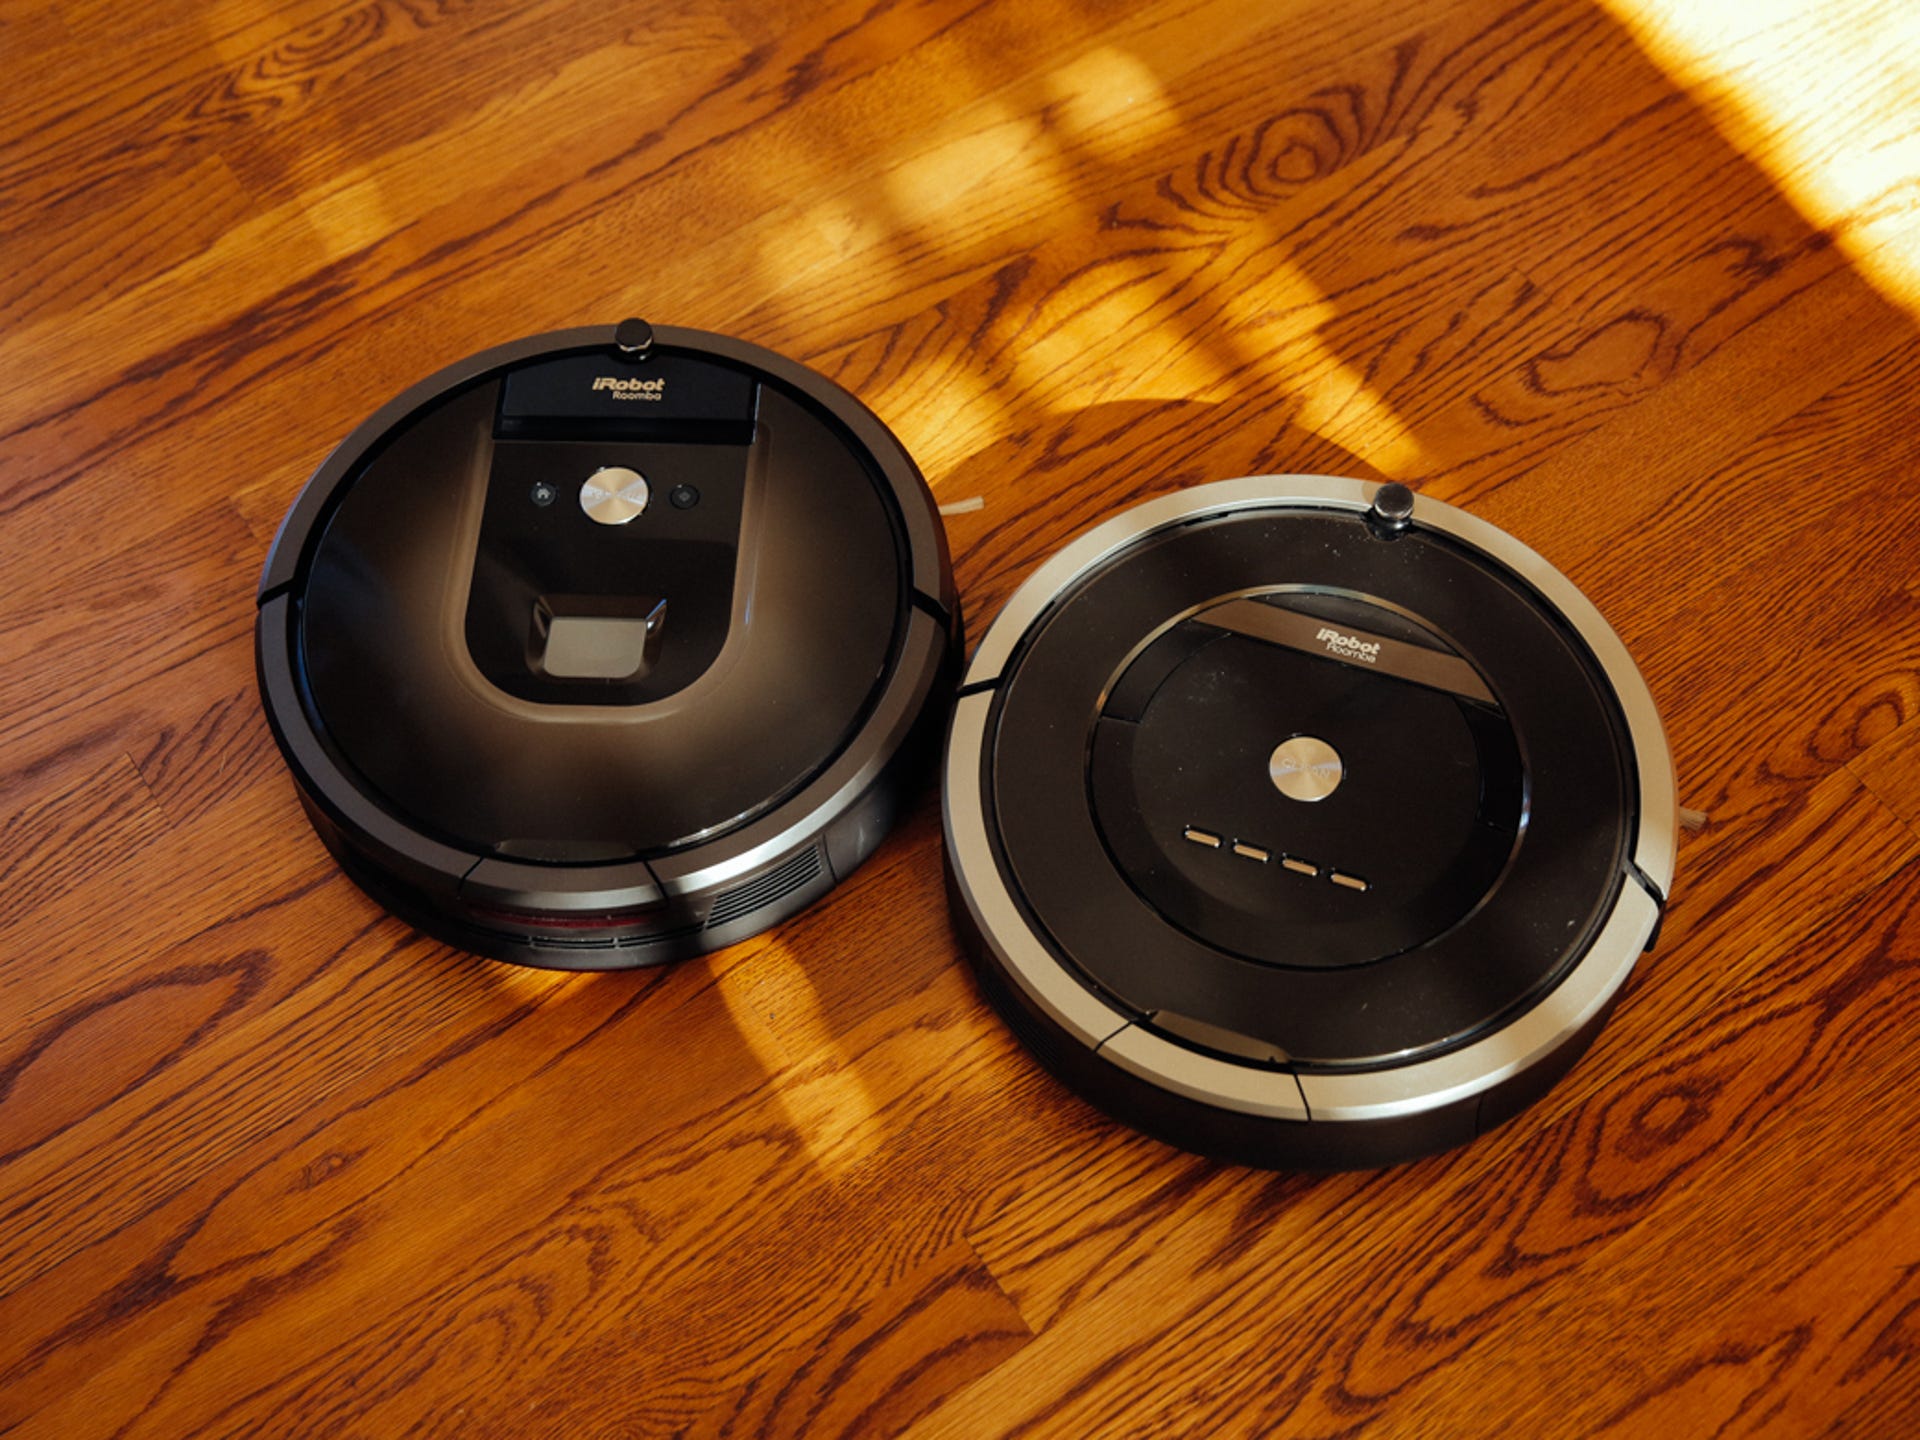 iRobot Roomba 980 You'll pay a premium for this smart but unexceptional vacuum - CNET